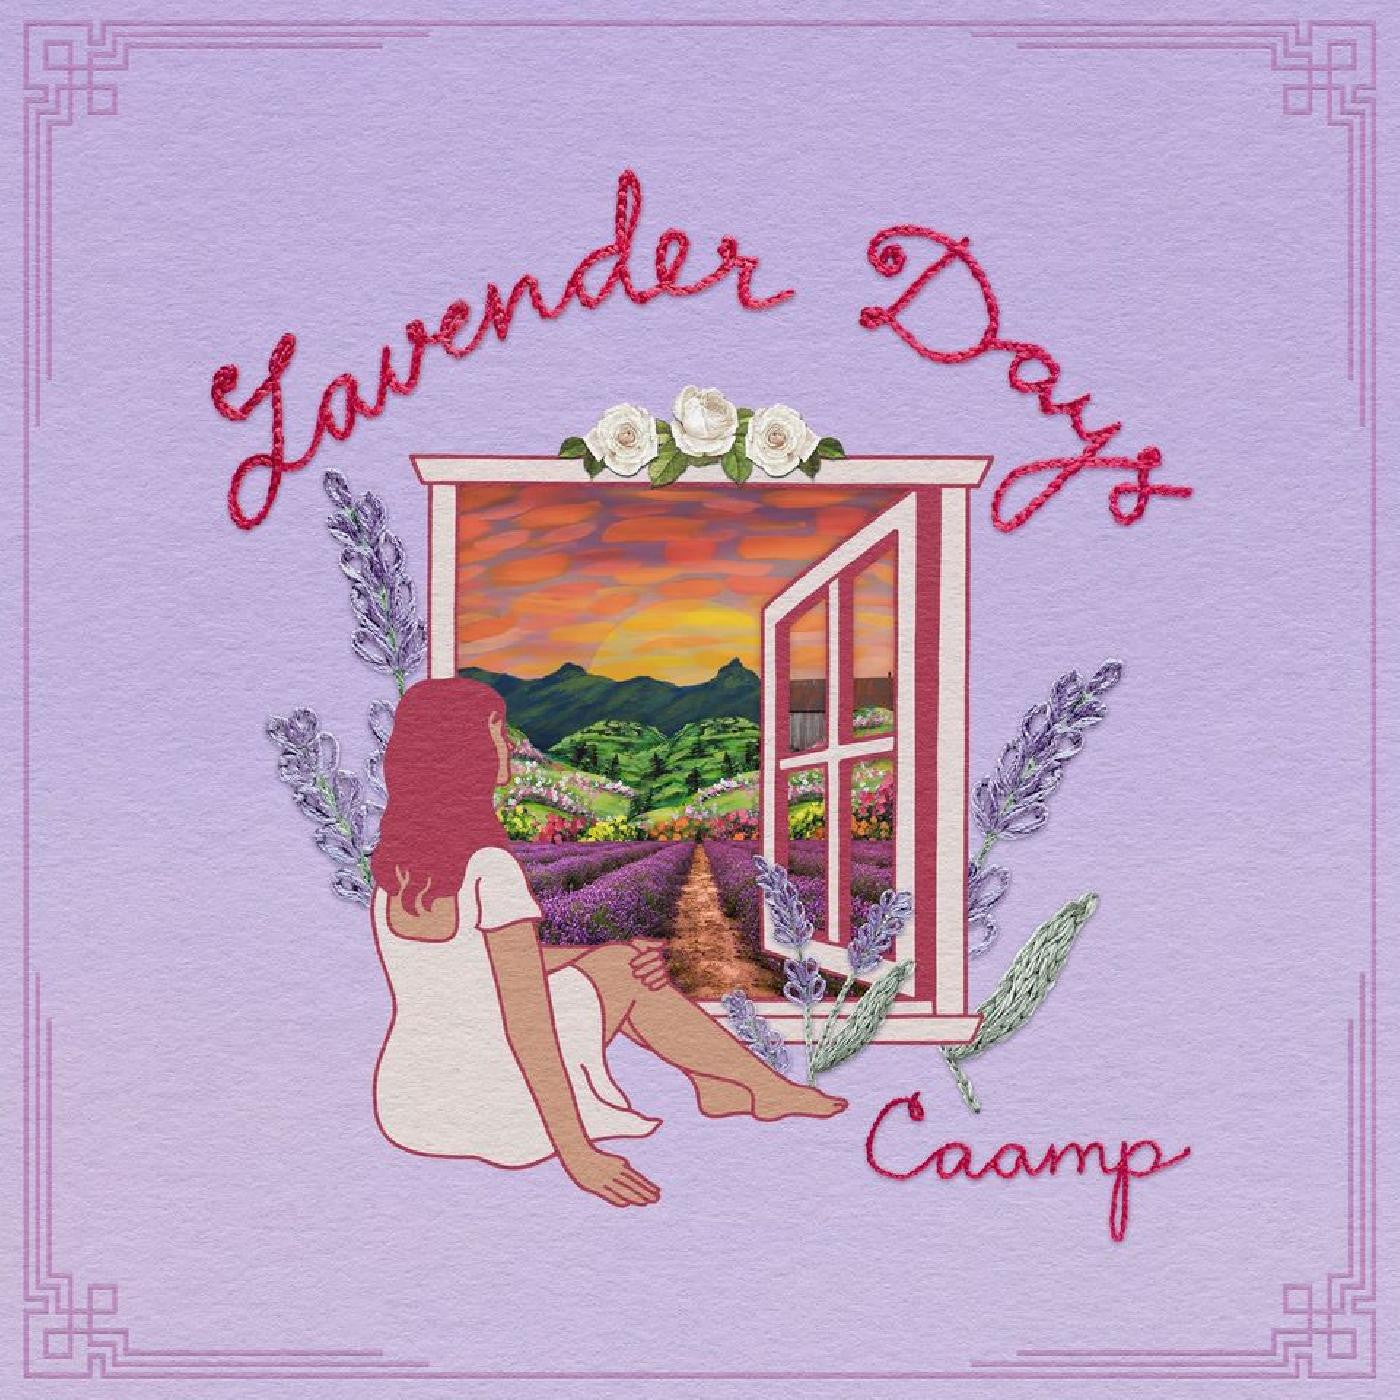 Order Caamp - Lavender Days (Orchid and Tangerine Vinyl)